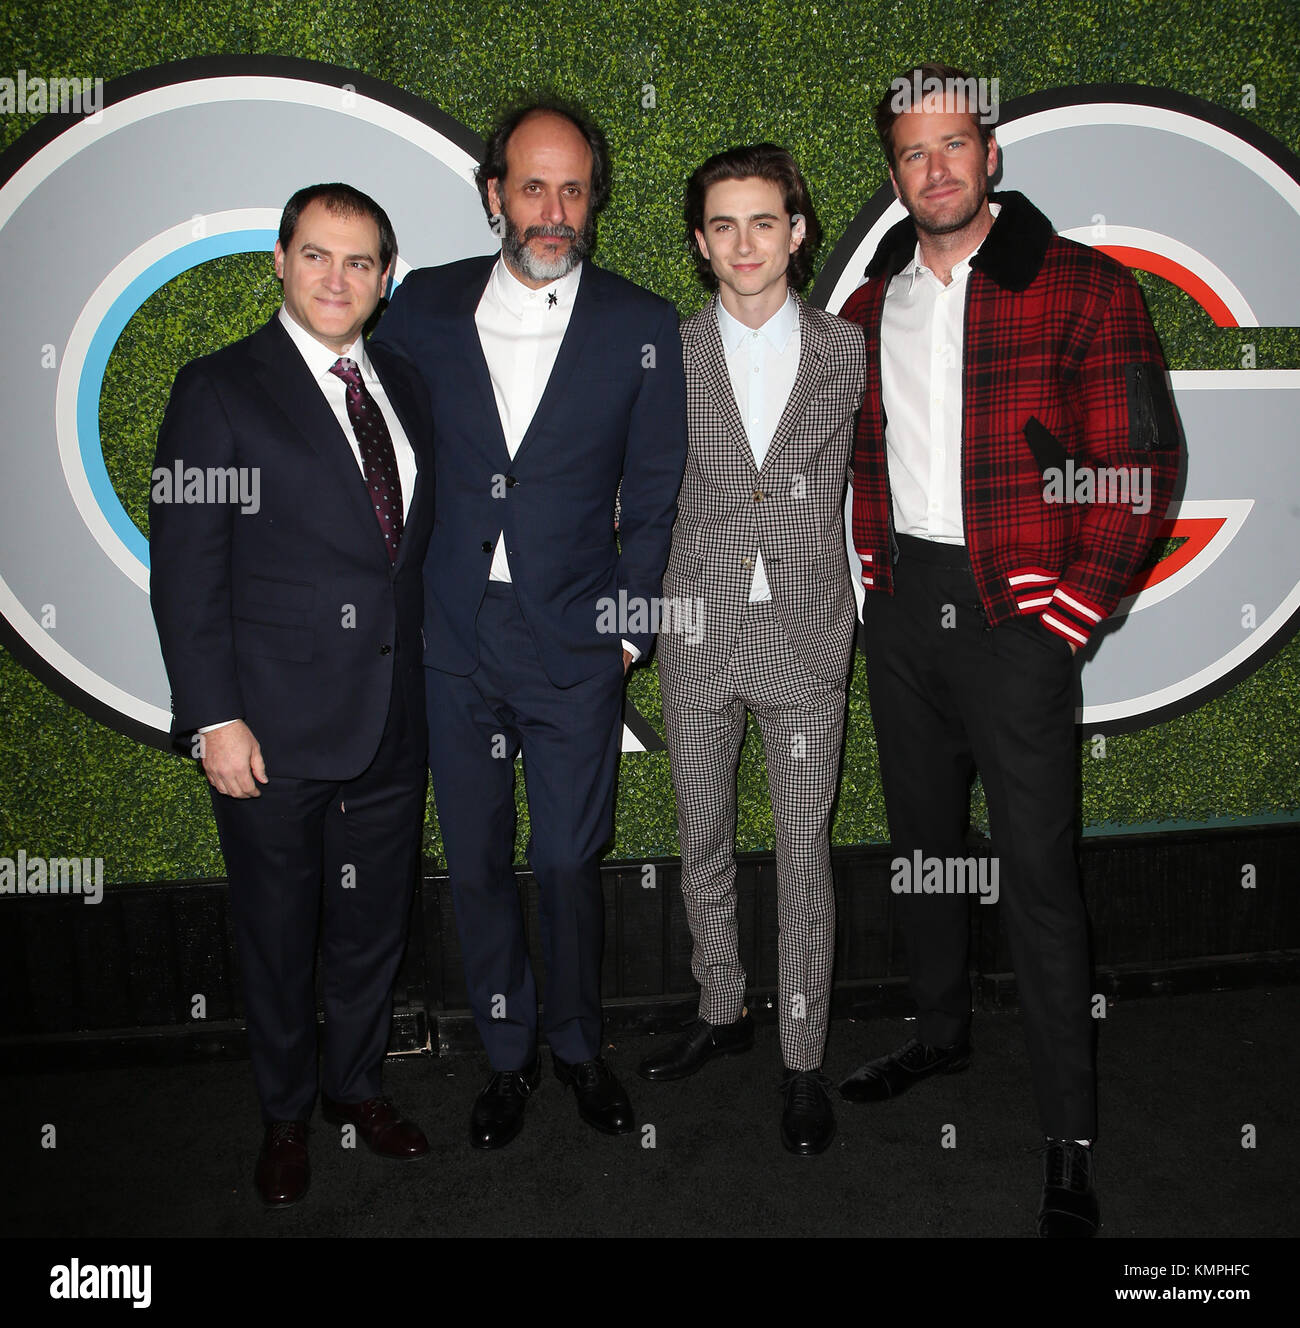 December 7, 2017 - West Hollywood, California, U.S. - 07 December 2017 - West Hollywood, California - Michael Stuhlbarg, Luca Guadagnino, Timothee Chalamet, Armie Hammer. 2017 GQ Men of the Year Party held at Chateau Marmont. Photo Credit: F. Sadou/AdMedia (Credit Image: © F. Sadou/AdMedia via ZUMA Wire) Stock Photo